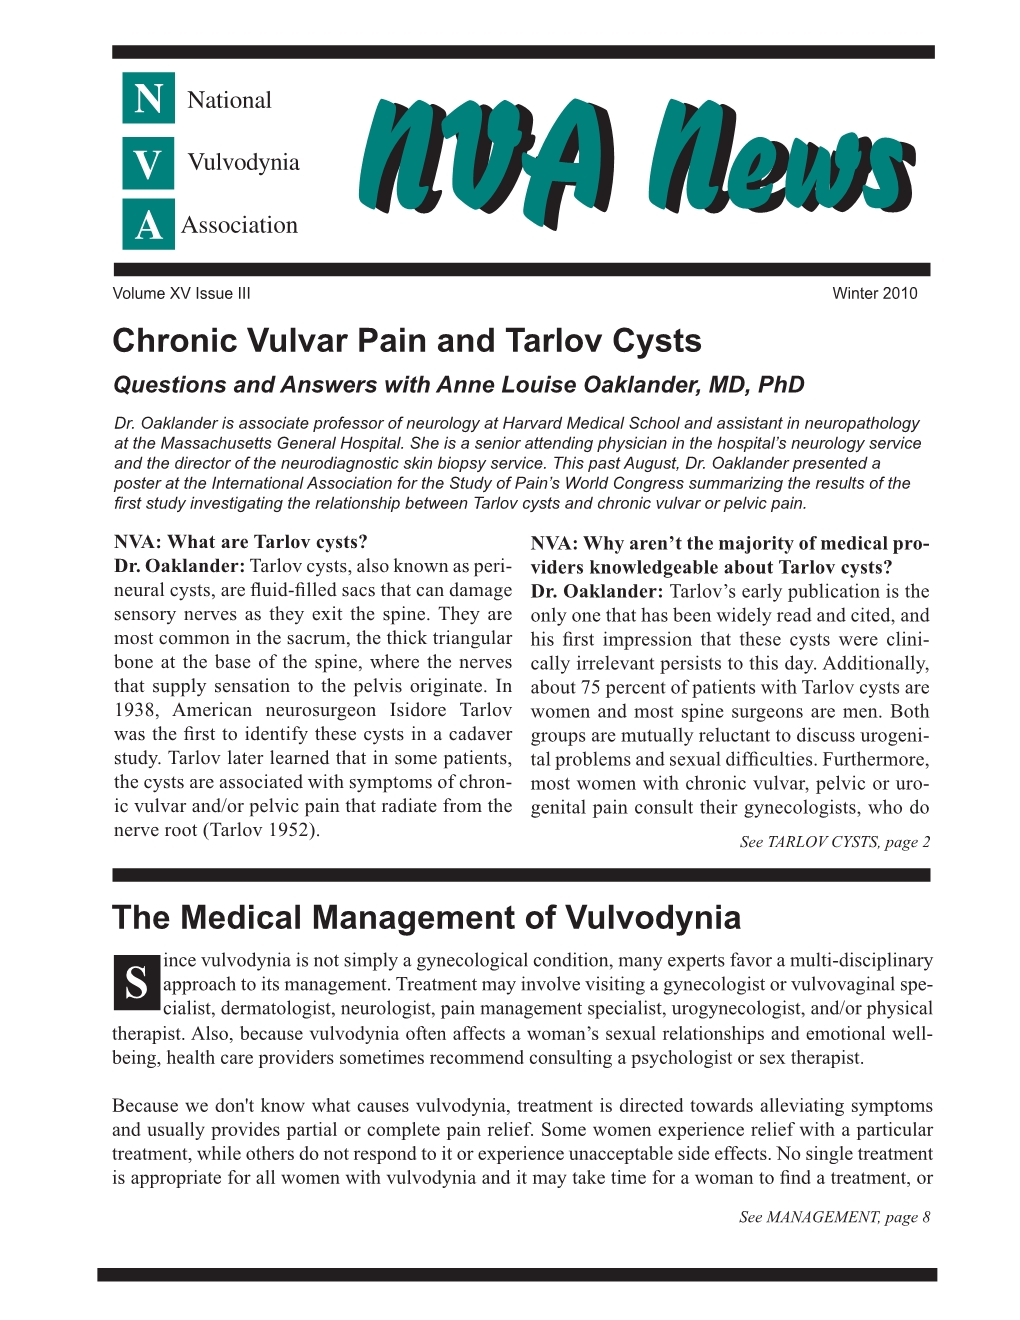 Chronic Vulvar Pain and Tarlov Cysts Questions and Answers with Anne Louise Oaklander, MD, Phd